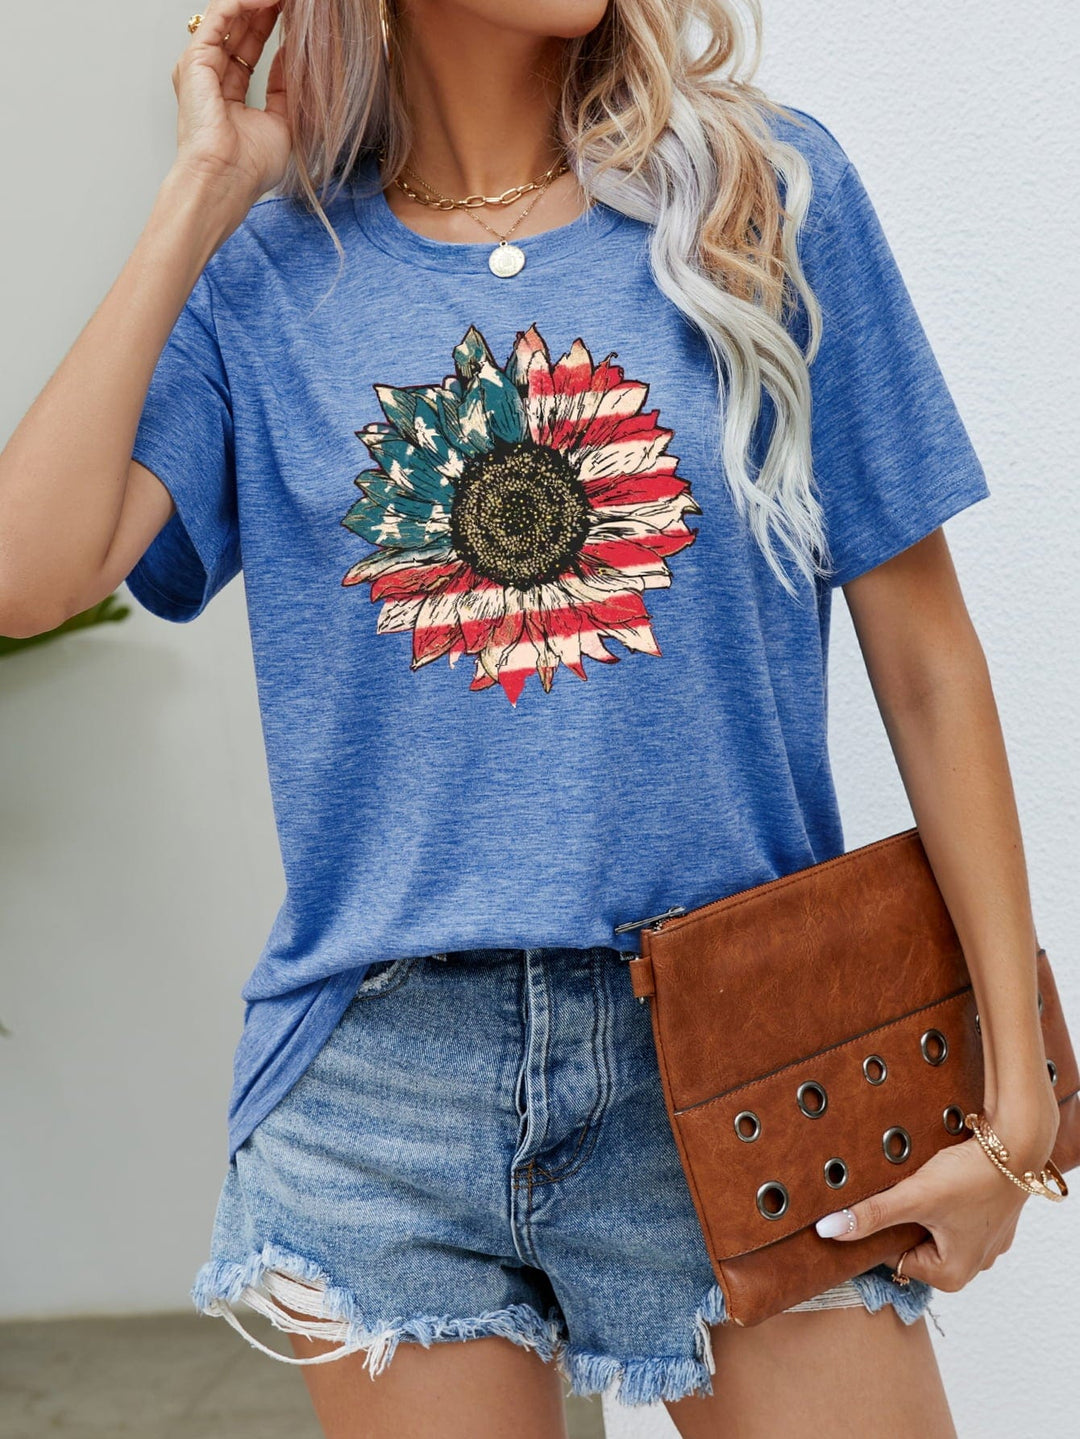 The802Gypsy shirts and tops Cobalt Blue / S ❤️GYPSY-US Flag Flower Graphic Tee